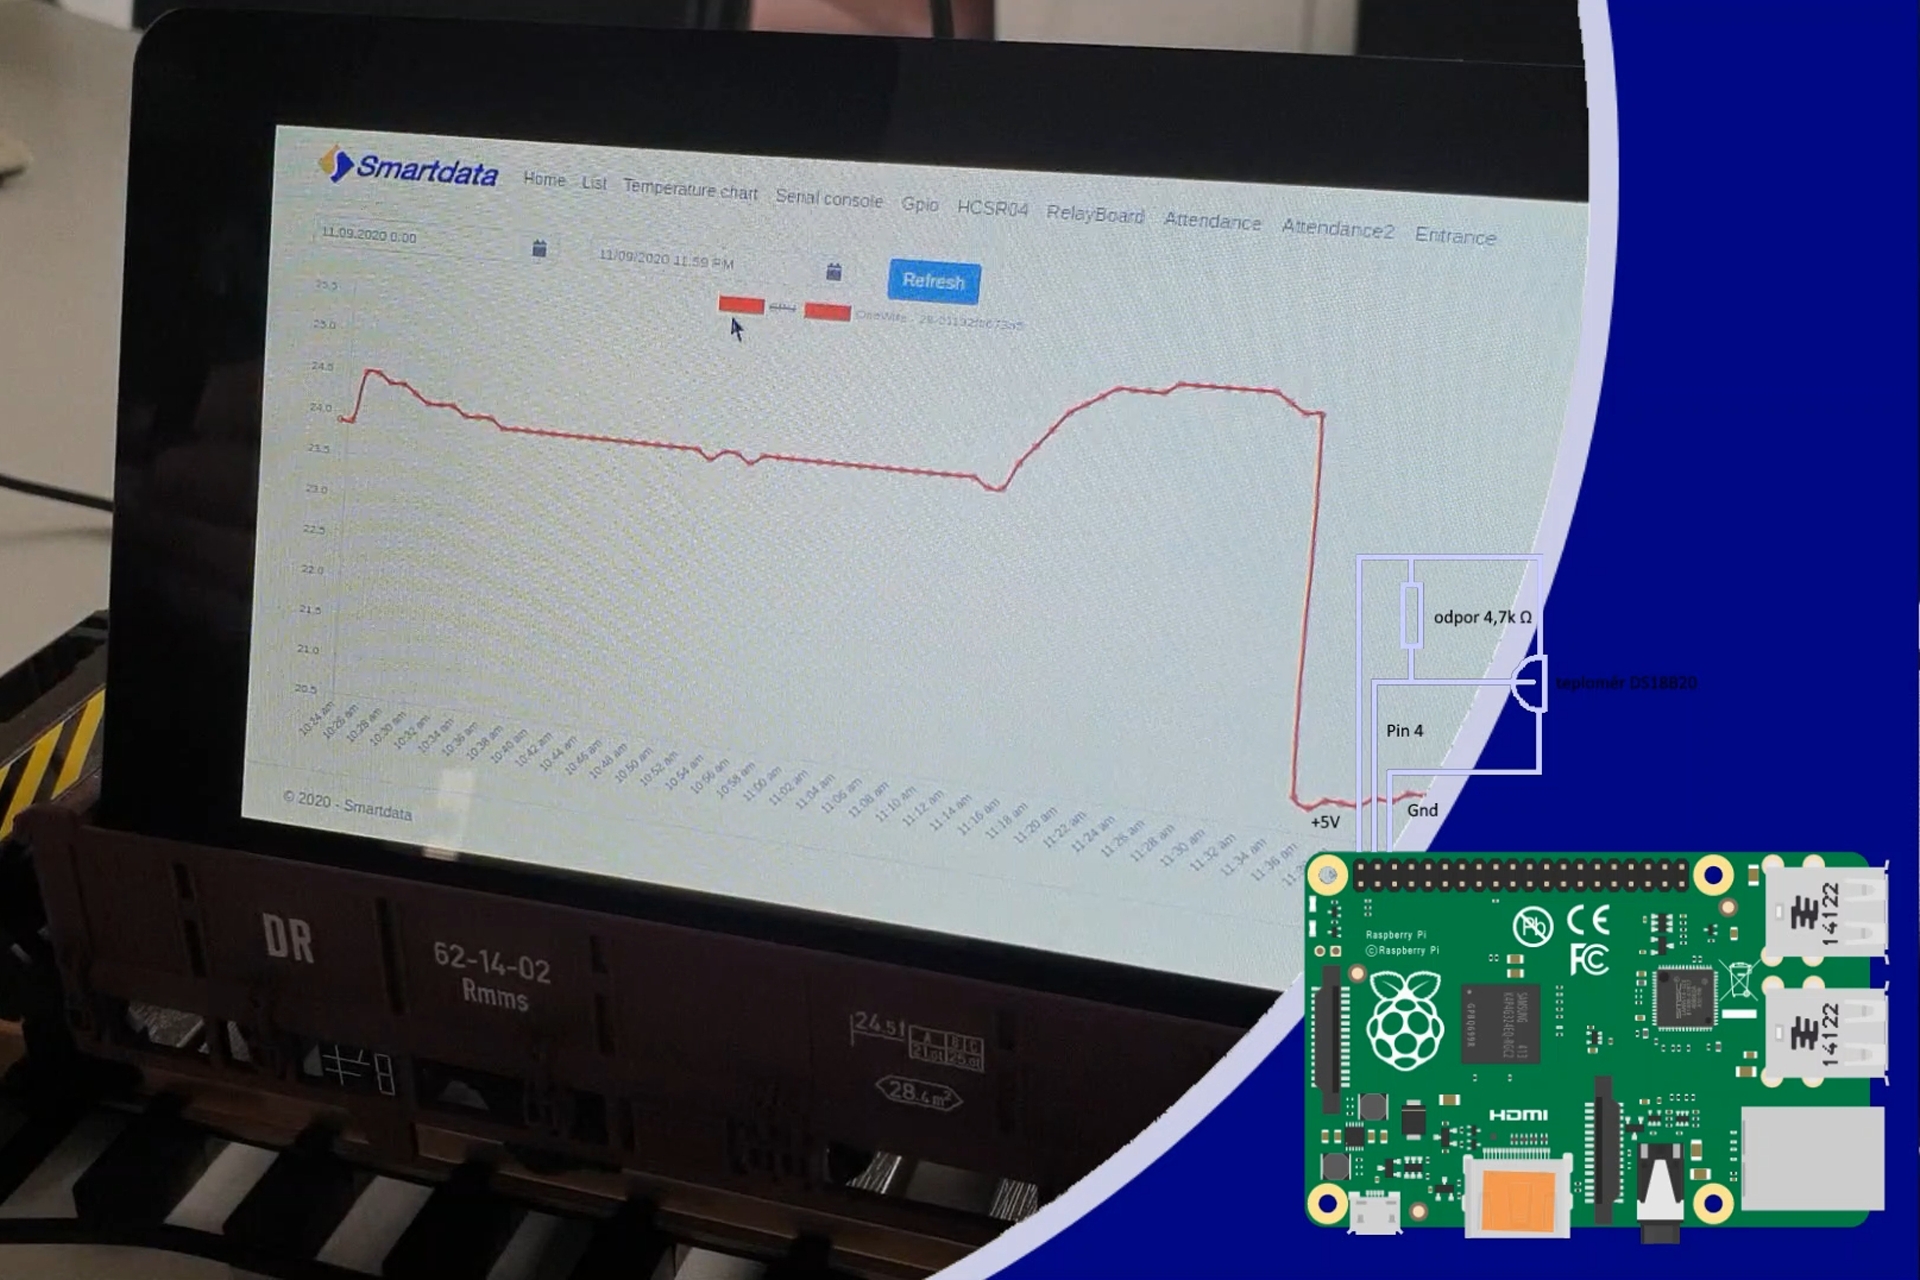 Demonstration of temperature control of different technologies using Raspberry Pi